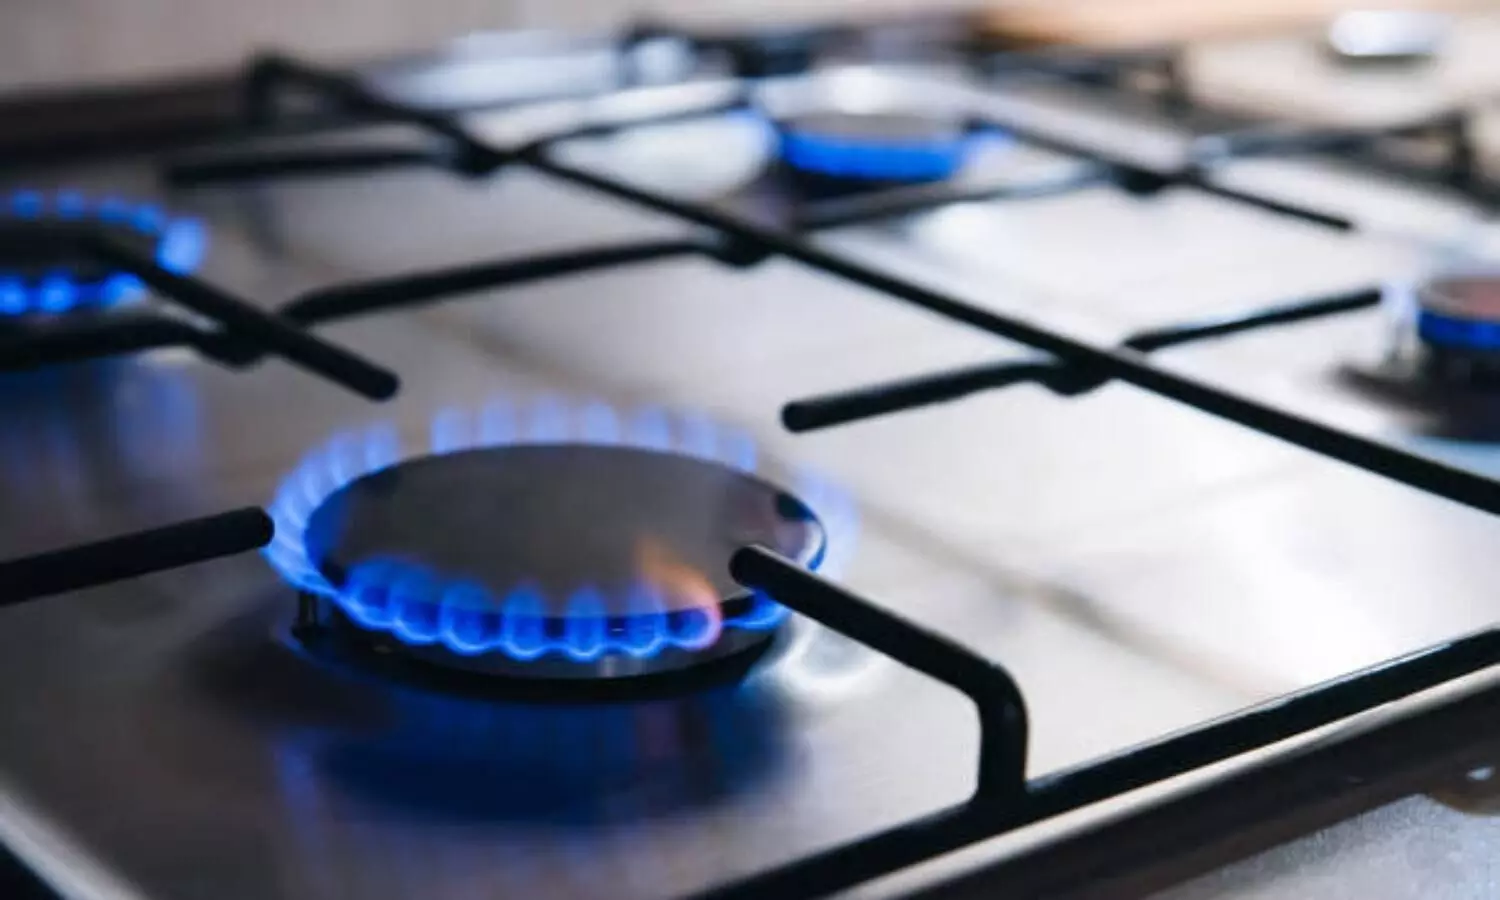 gas stove could be dangerous for health